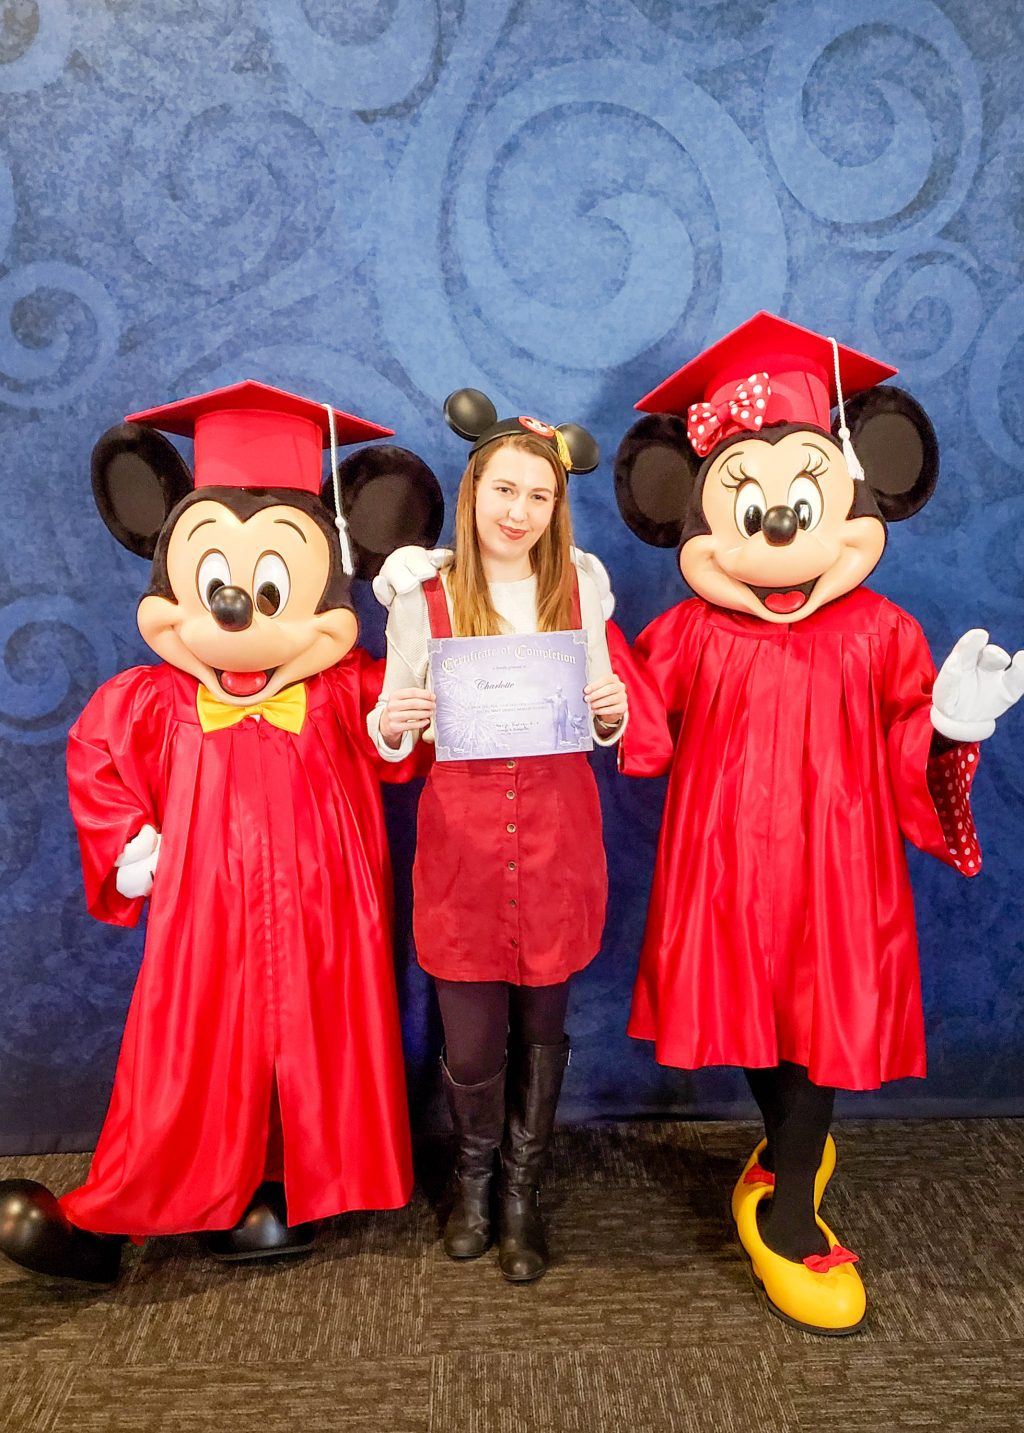 How to List the Disney College Program on Your Resume